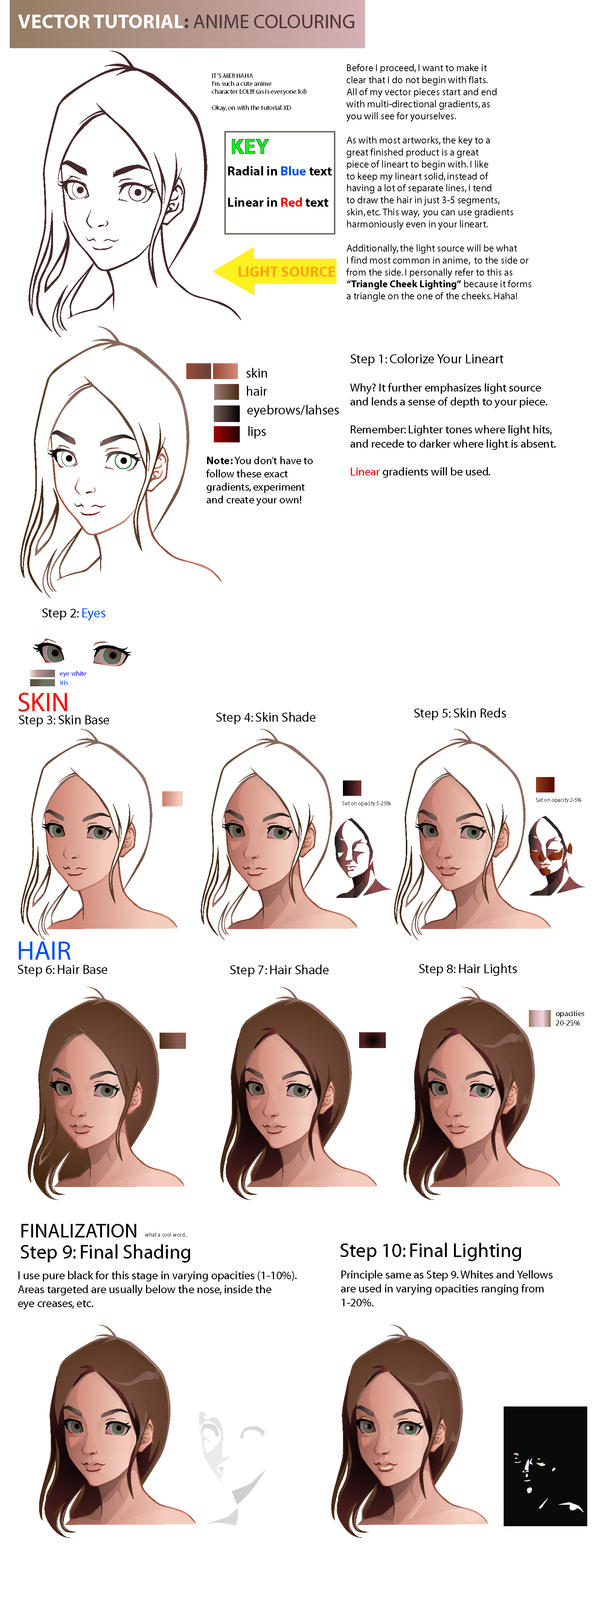 Vector Tutorial:Anime Coloring by taho on DeviantArt